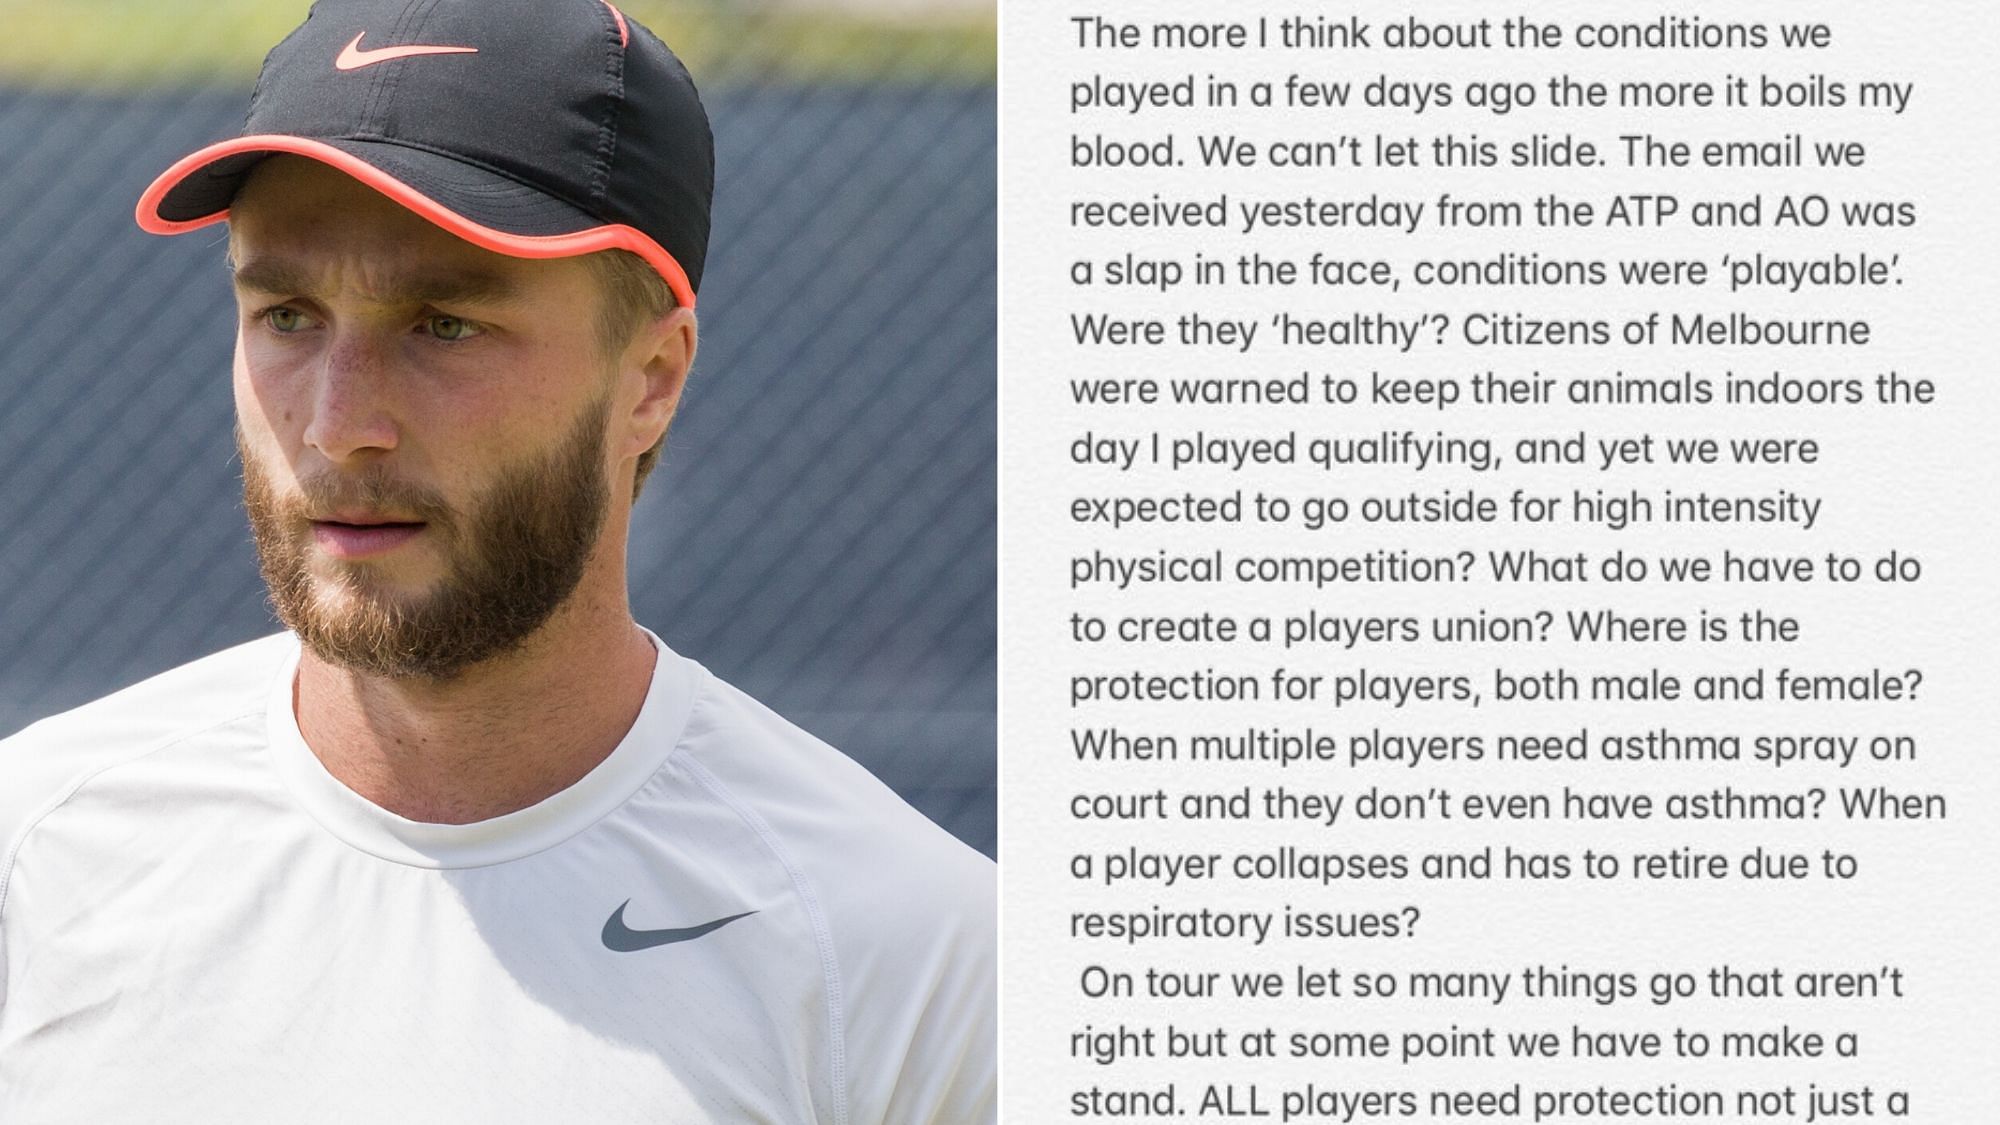 Britain’s Liam Broady on Thursday, 16 January lashed out at Australian Open officials for insisting qualifying take place this week despite toxic smoke from bushfires, telling fellow players: “We can’t let this go.”